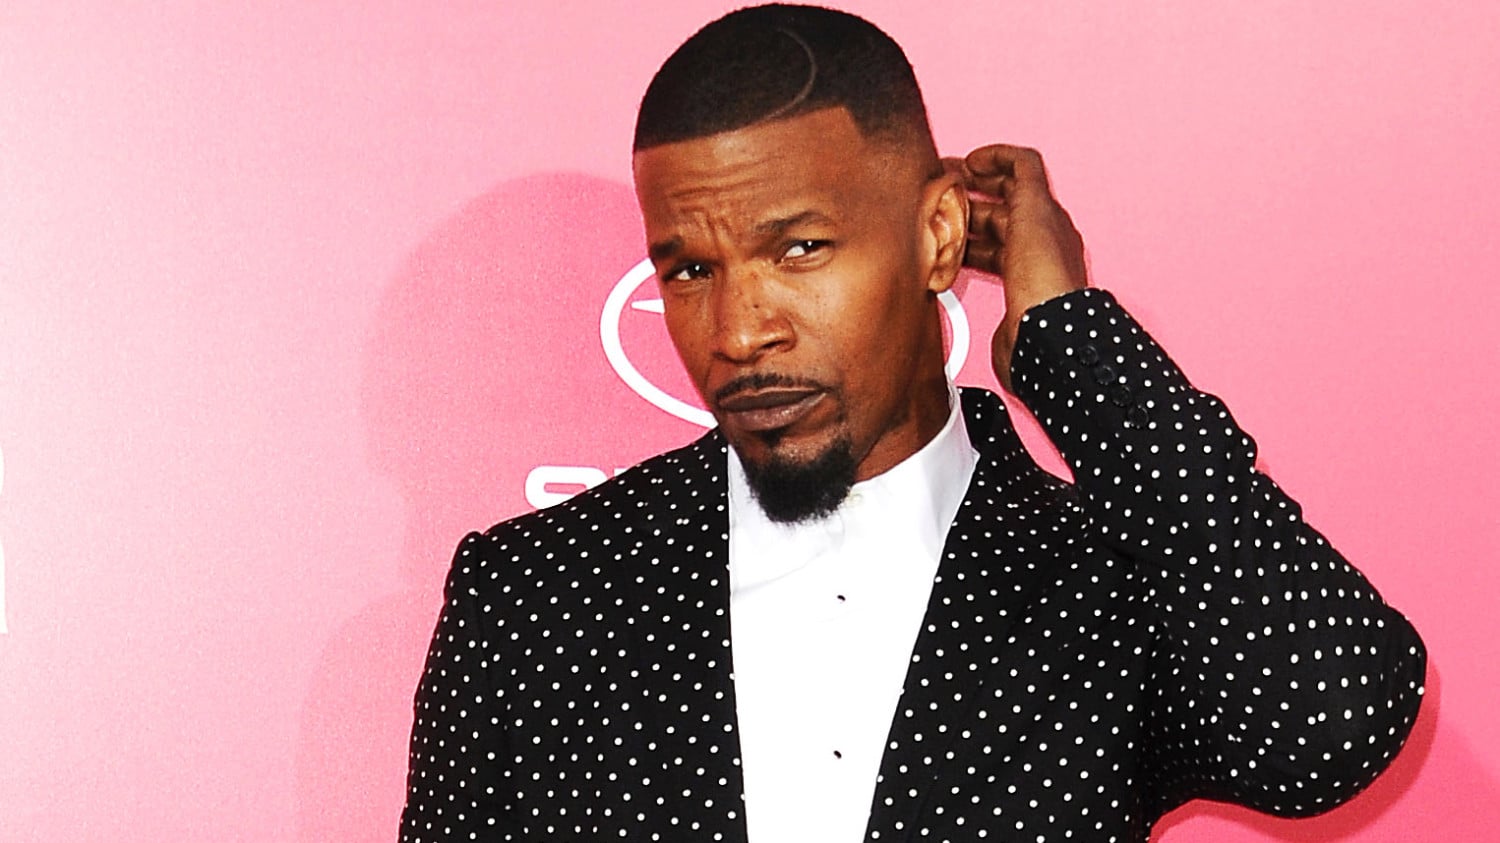 Actor Jamie Foxx Returns To Work Nearly Three Months After Medical Emergency